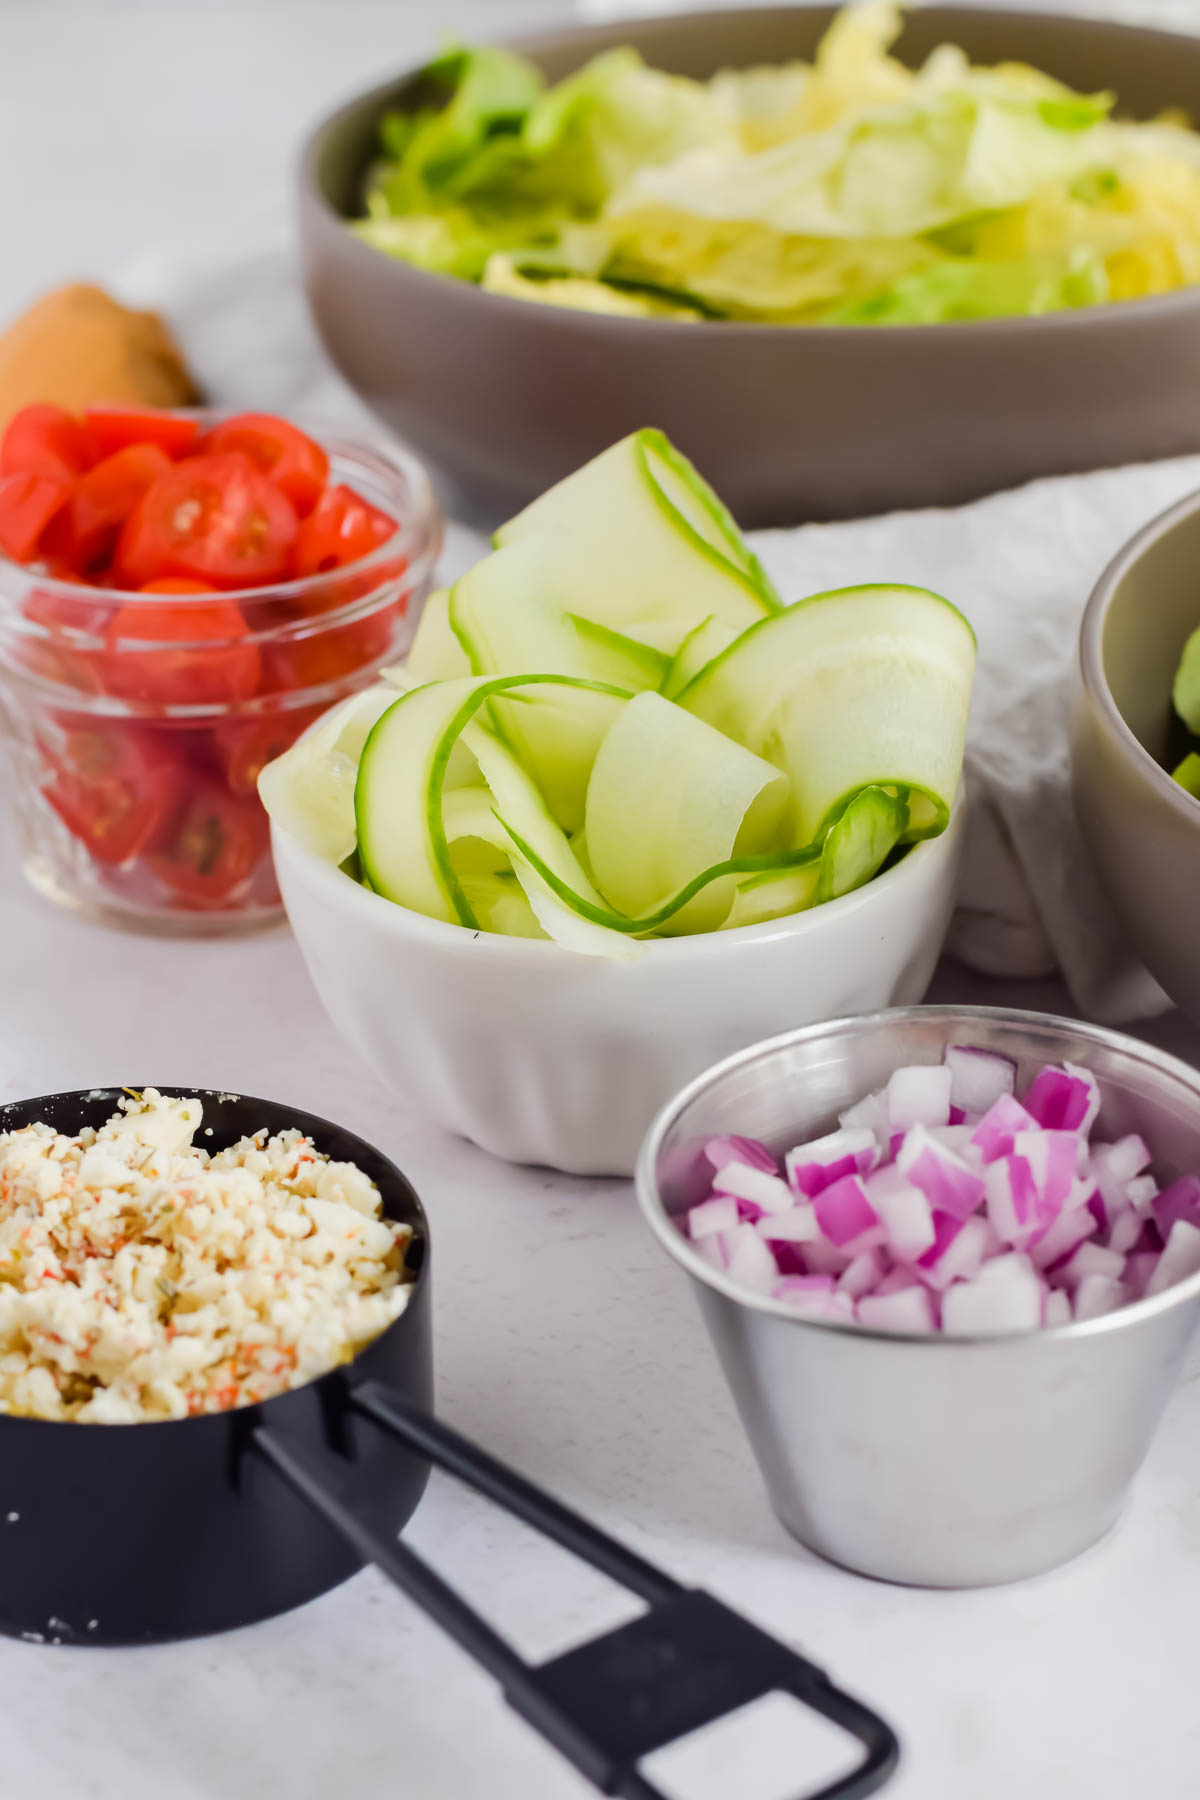 cucumber ribbons, diced red onion and crumbled feta cheese in individual bowls.